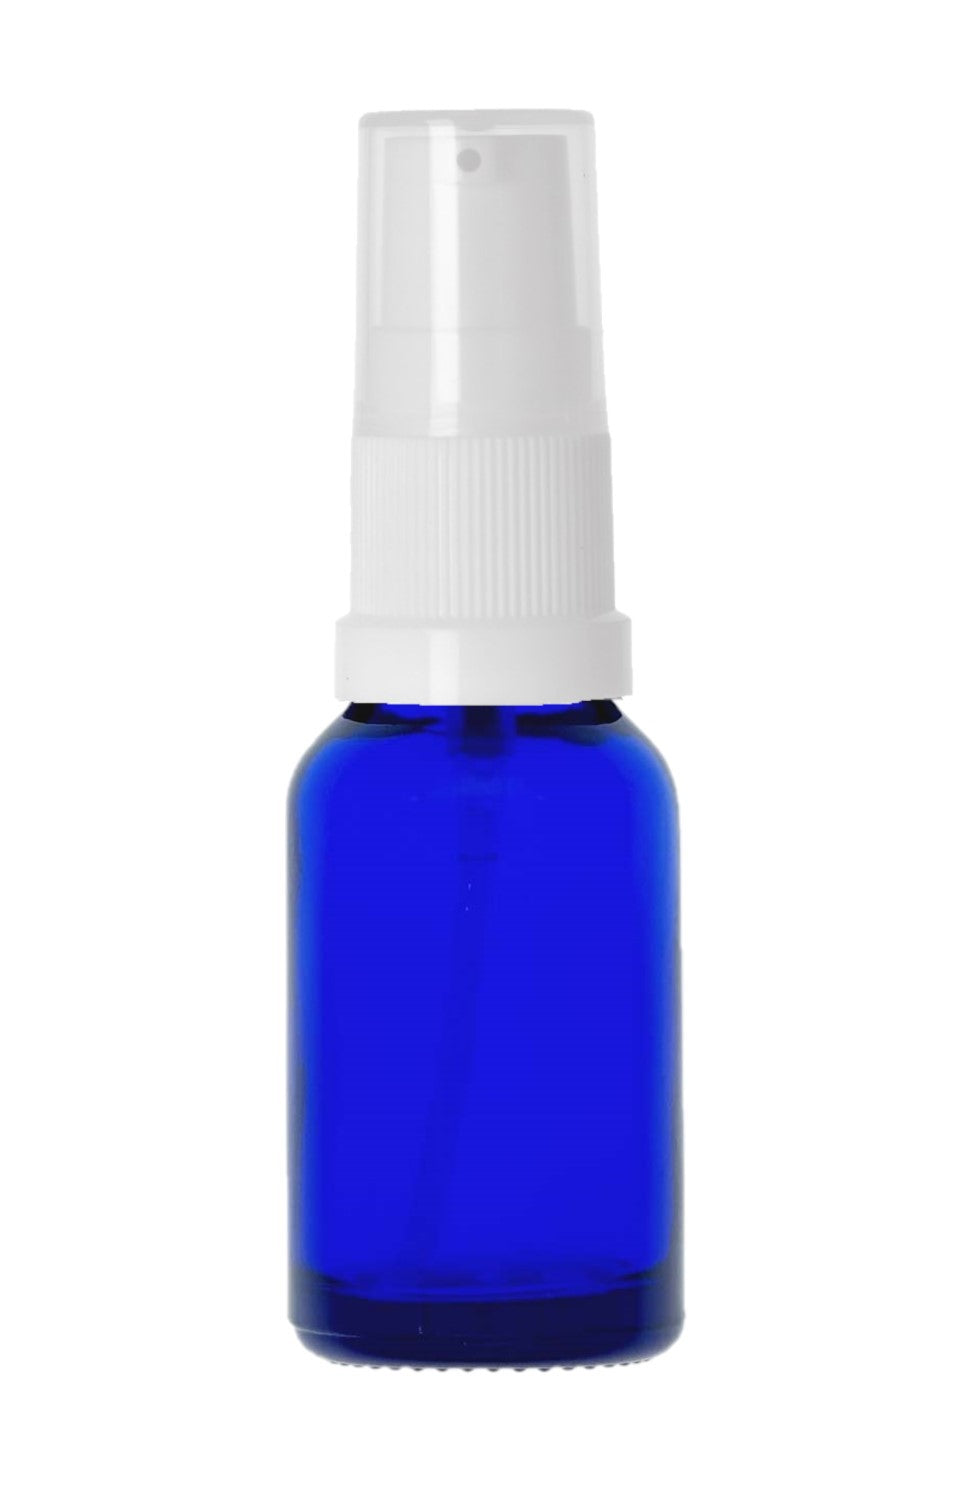 15ml Blue Glass Bottles with White Treatment Pump and Clear Overcap